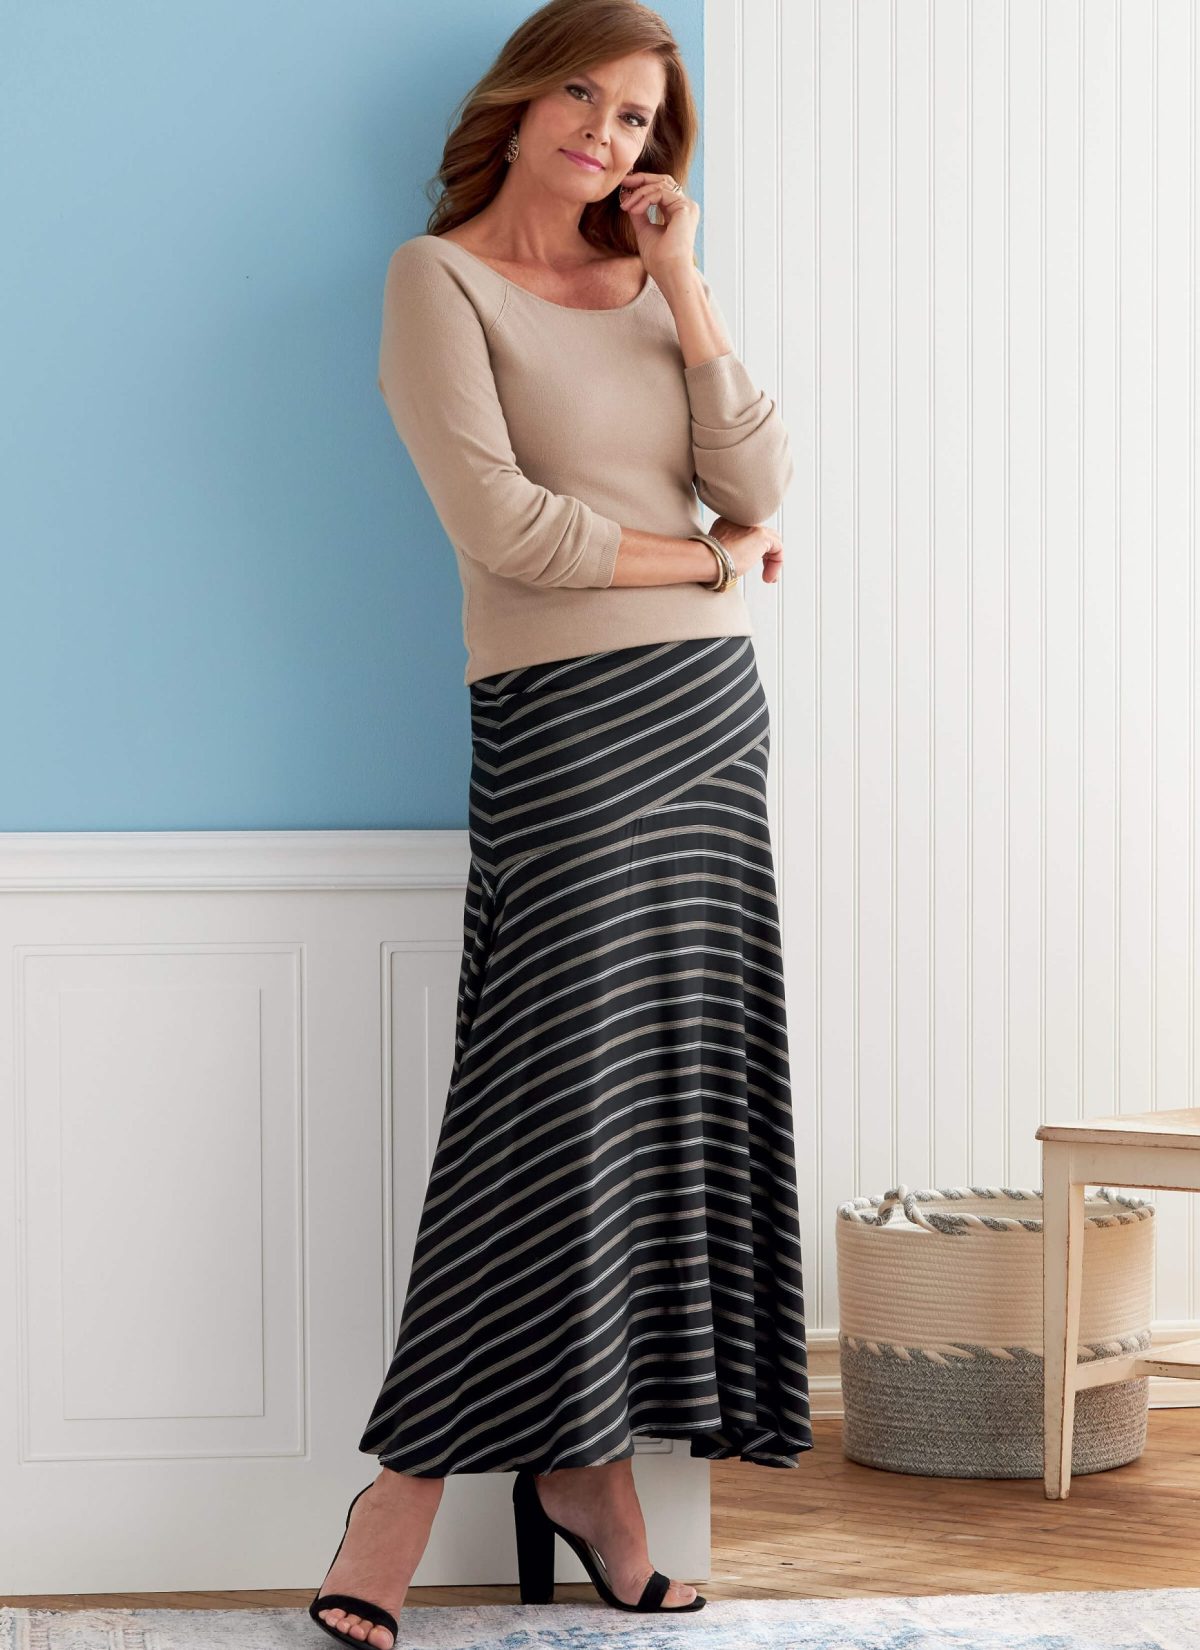 Butterick Sewing Pattern B6818 Misses' Skirt